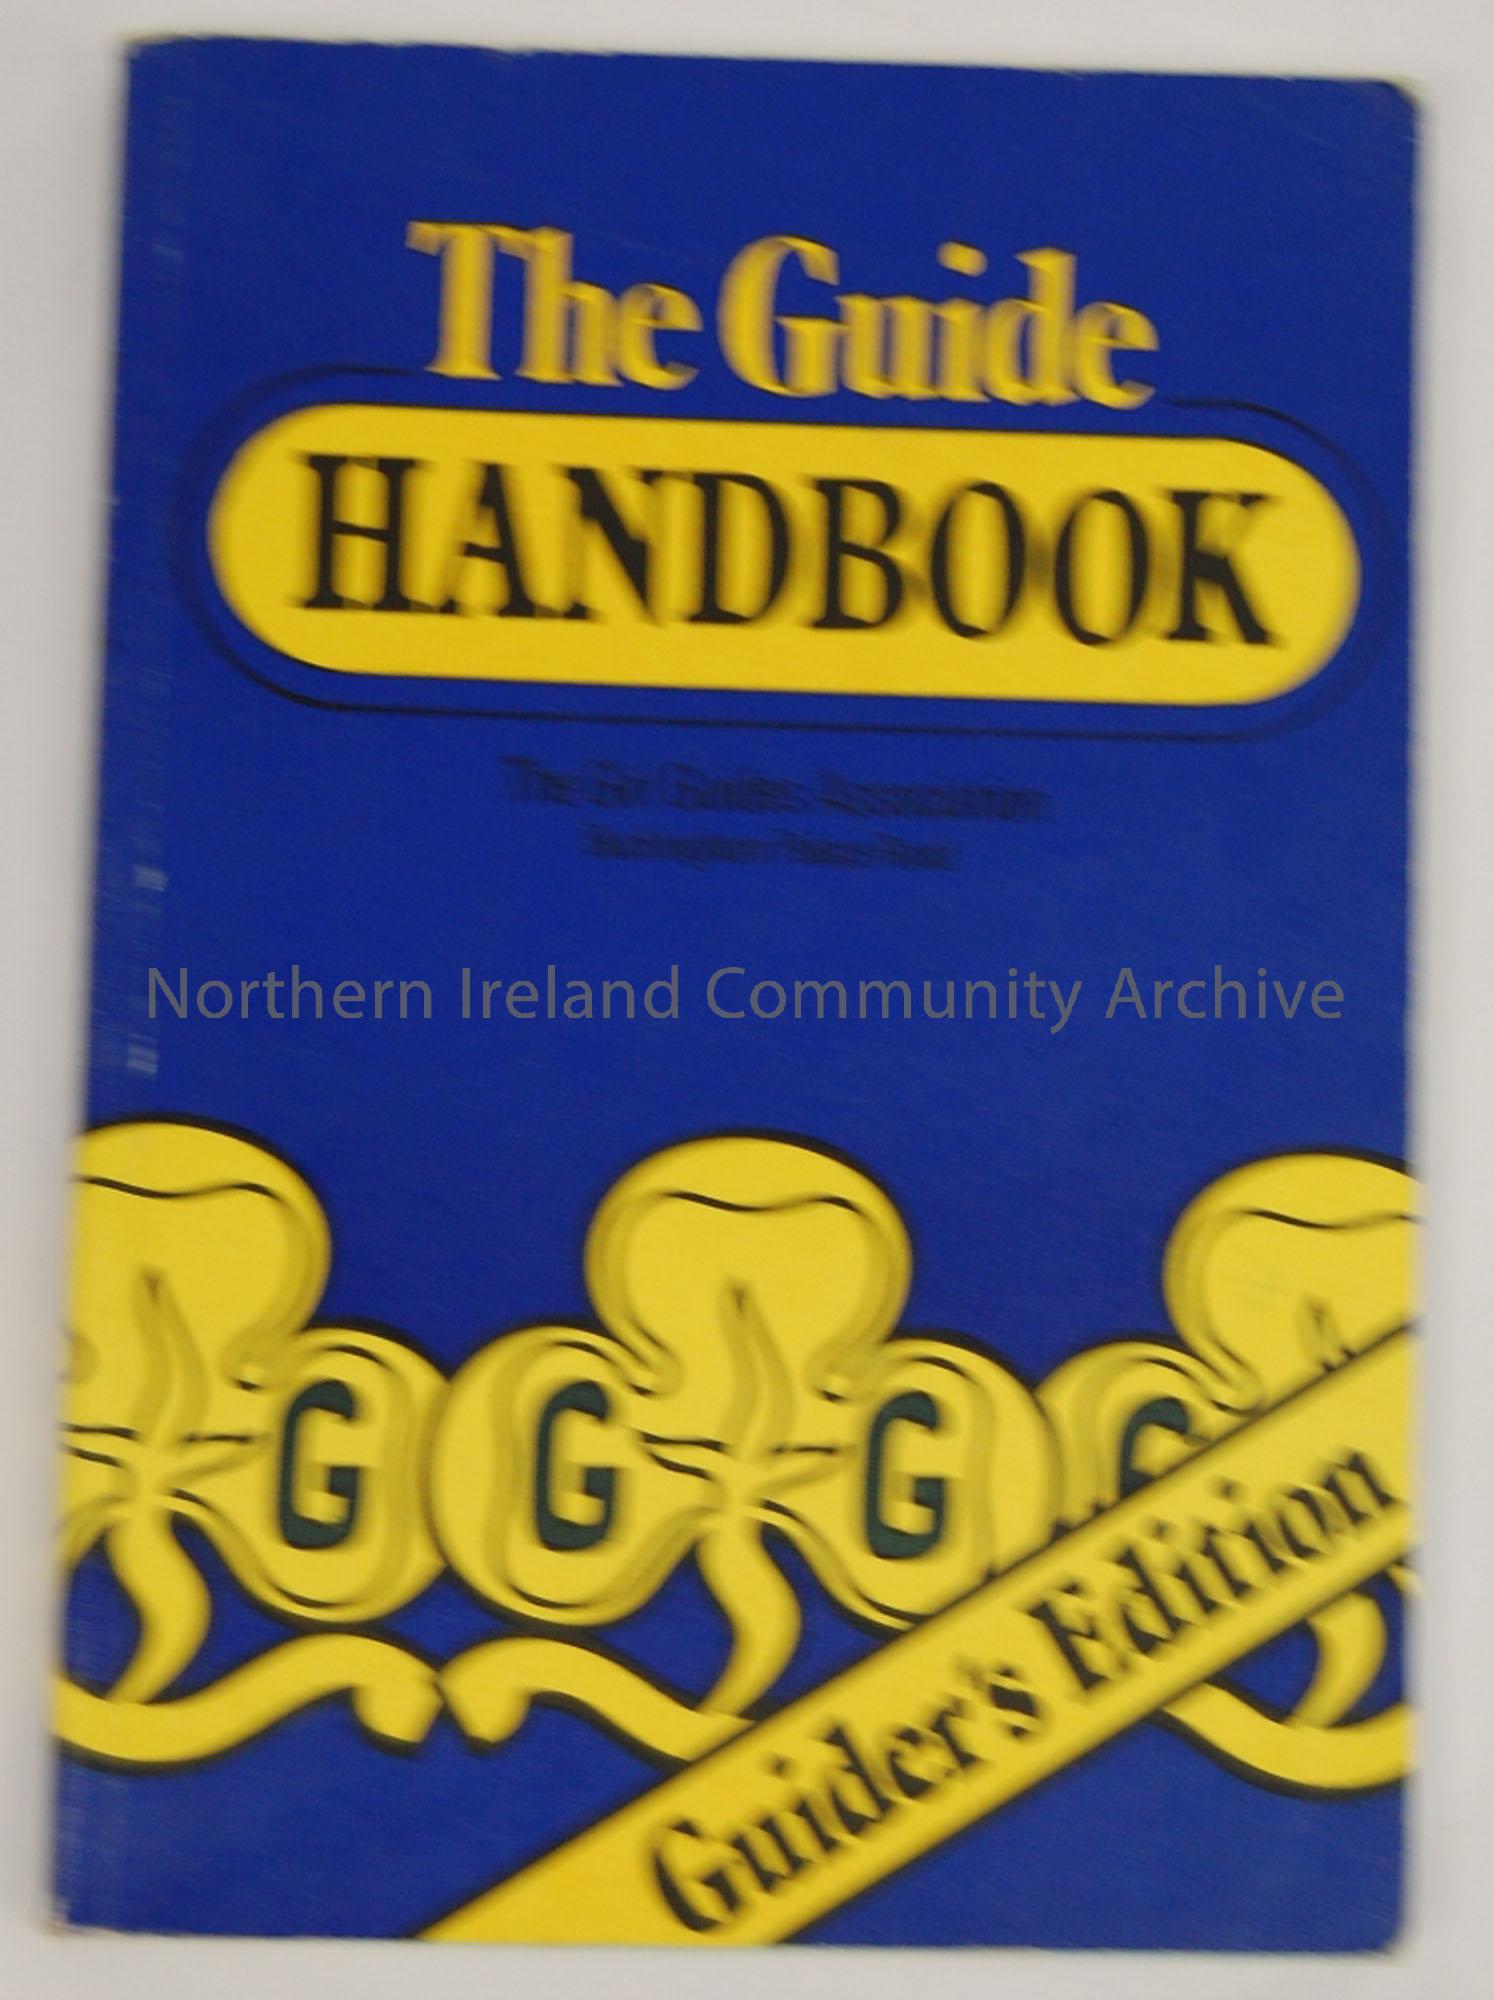 The Girl Guide Association. The Guide handbook, Guider’s edition. 1983. Price £1.50.